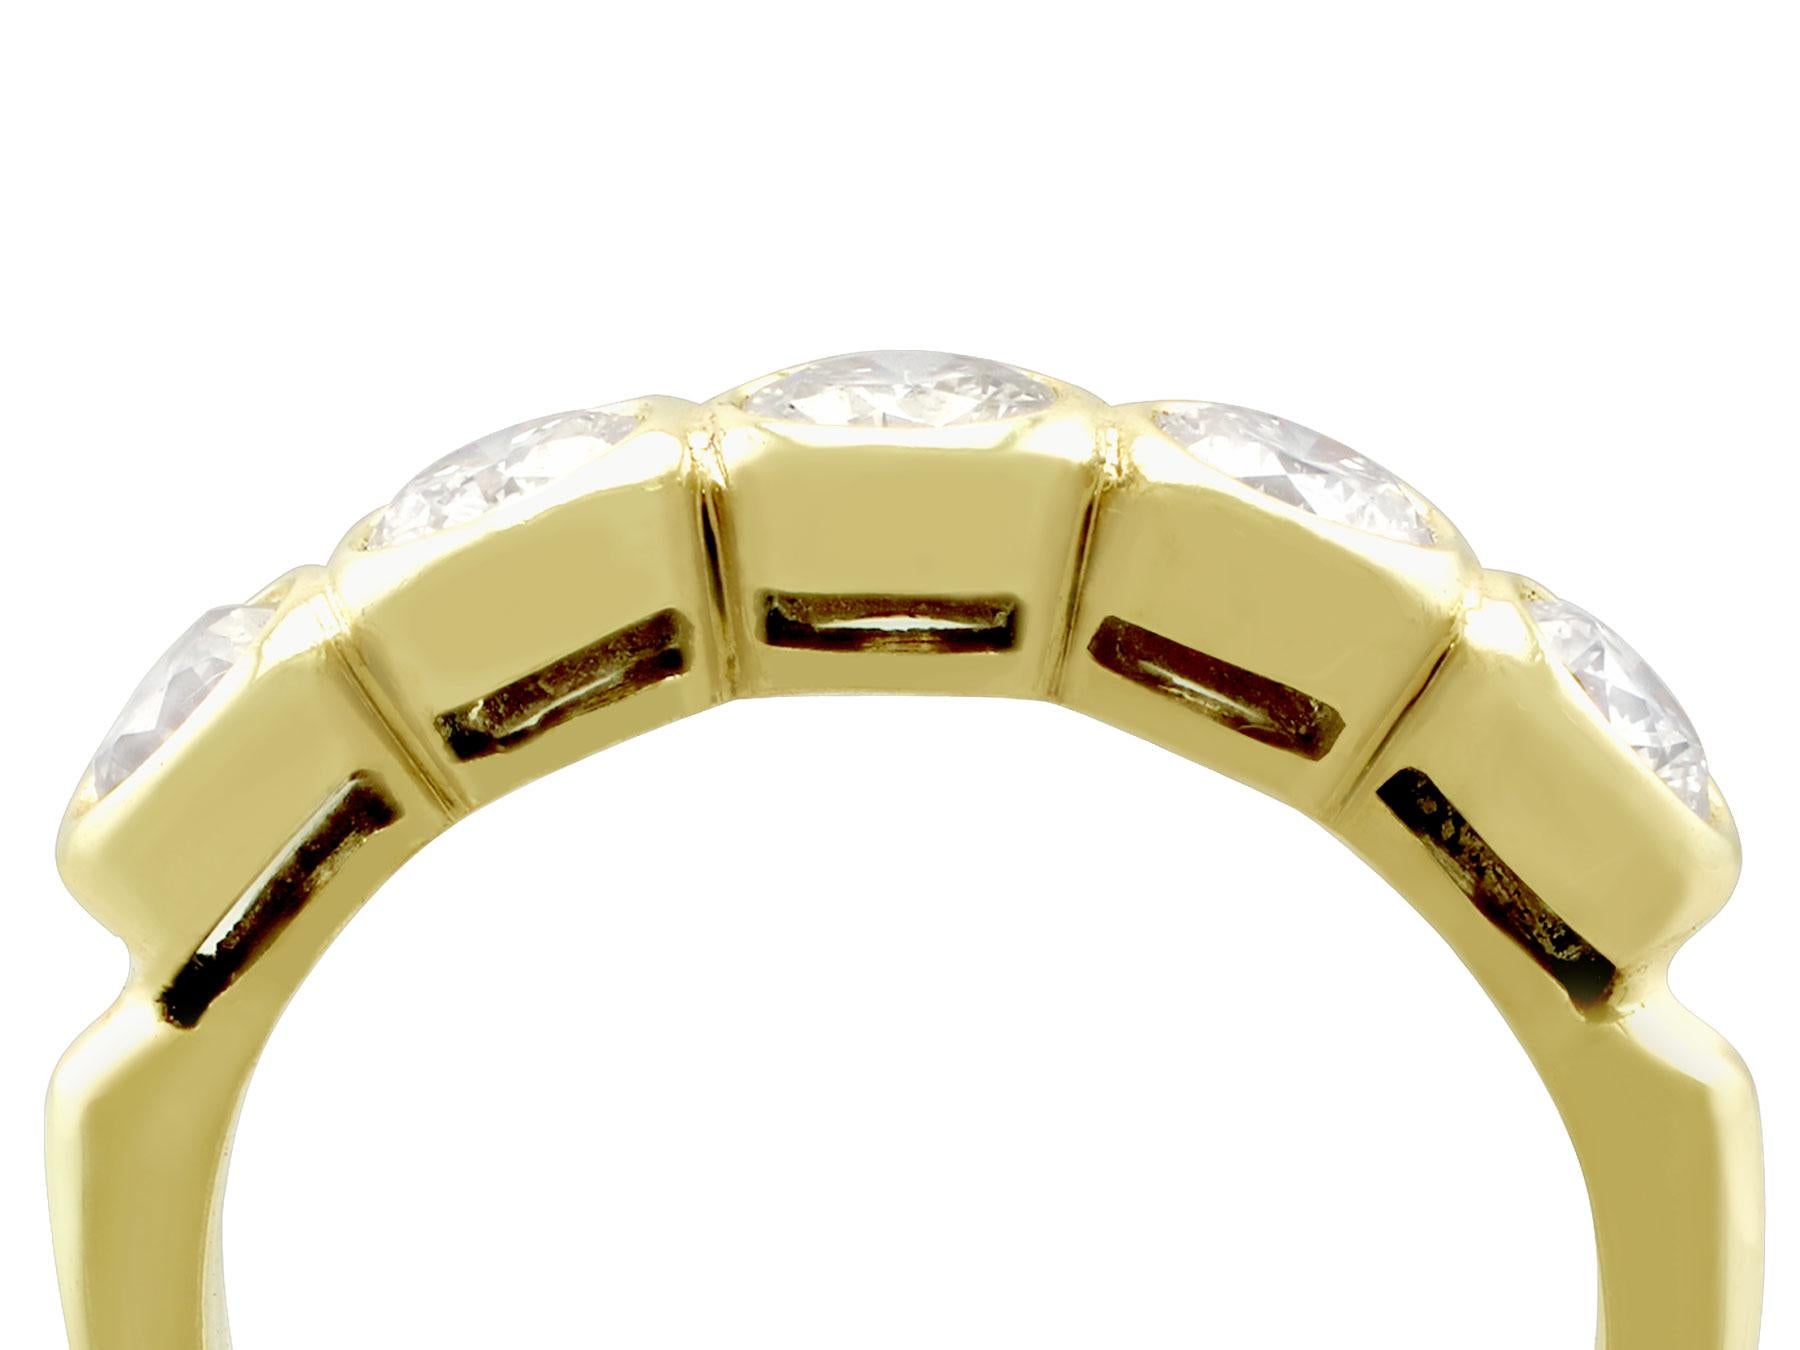 A fine and impressive vintage 1.25 carat, five stone diamond, 14 karat yellow gold ring; part of our vintage jewelry and estate jewelry collections.

This ladies vintage diamond cocktail ring has been crafted in 14k yellow gold.

The ring displays